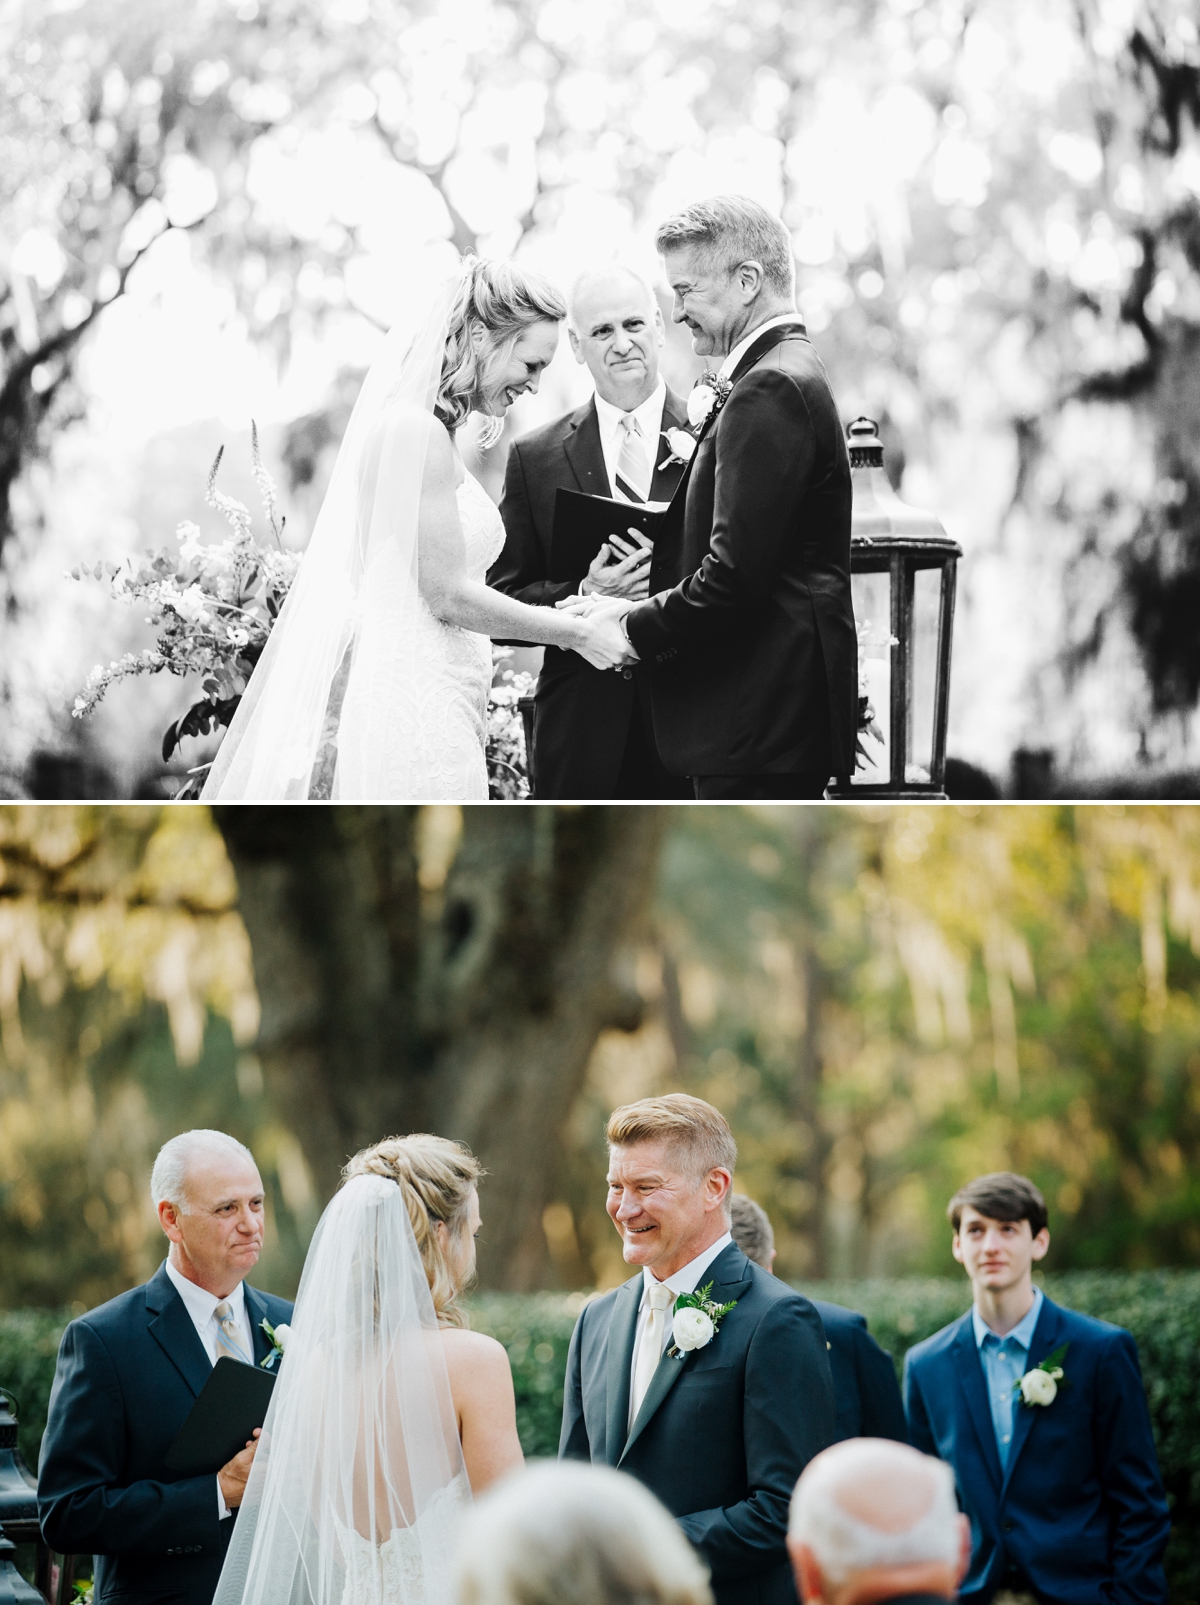 Spring wedding by Izzy Hudgins Photography